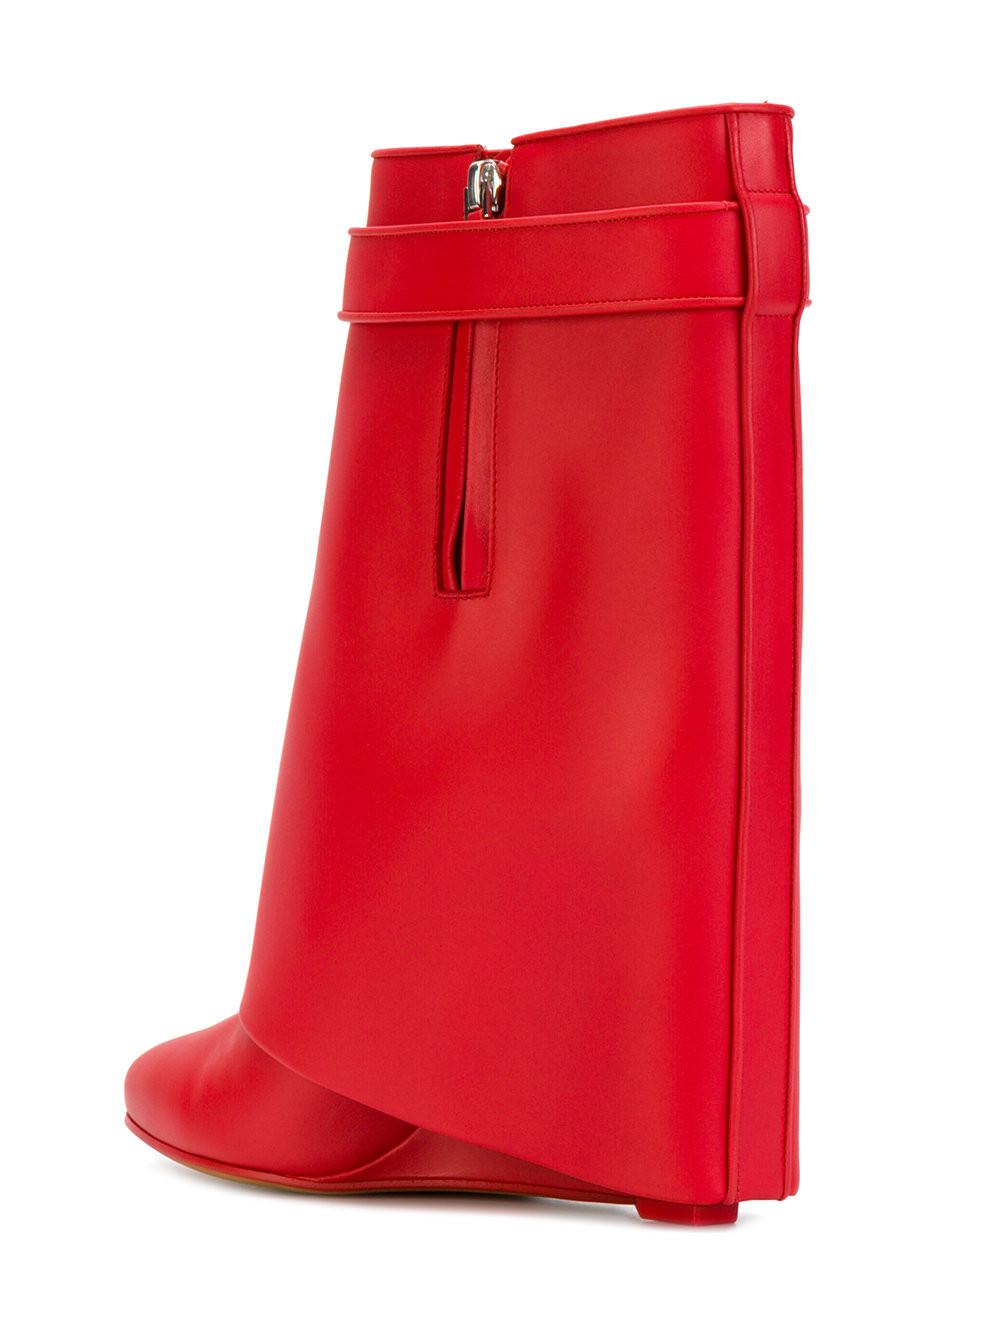 Givenchy Leather Shark Lock Boots in Red - Lyst